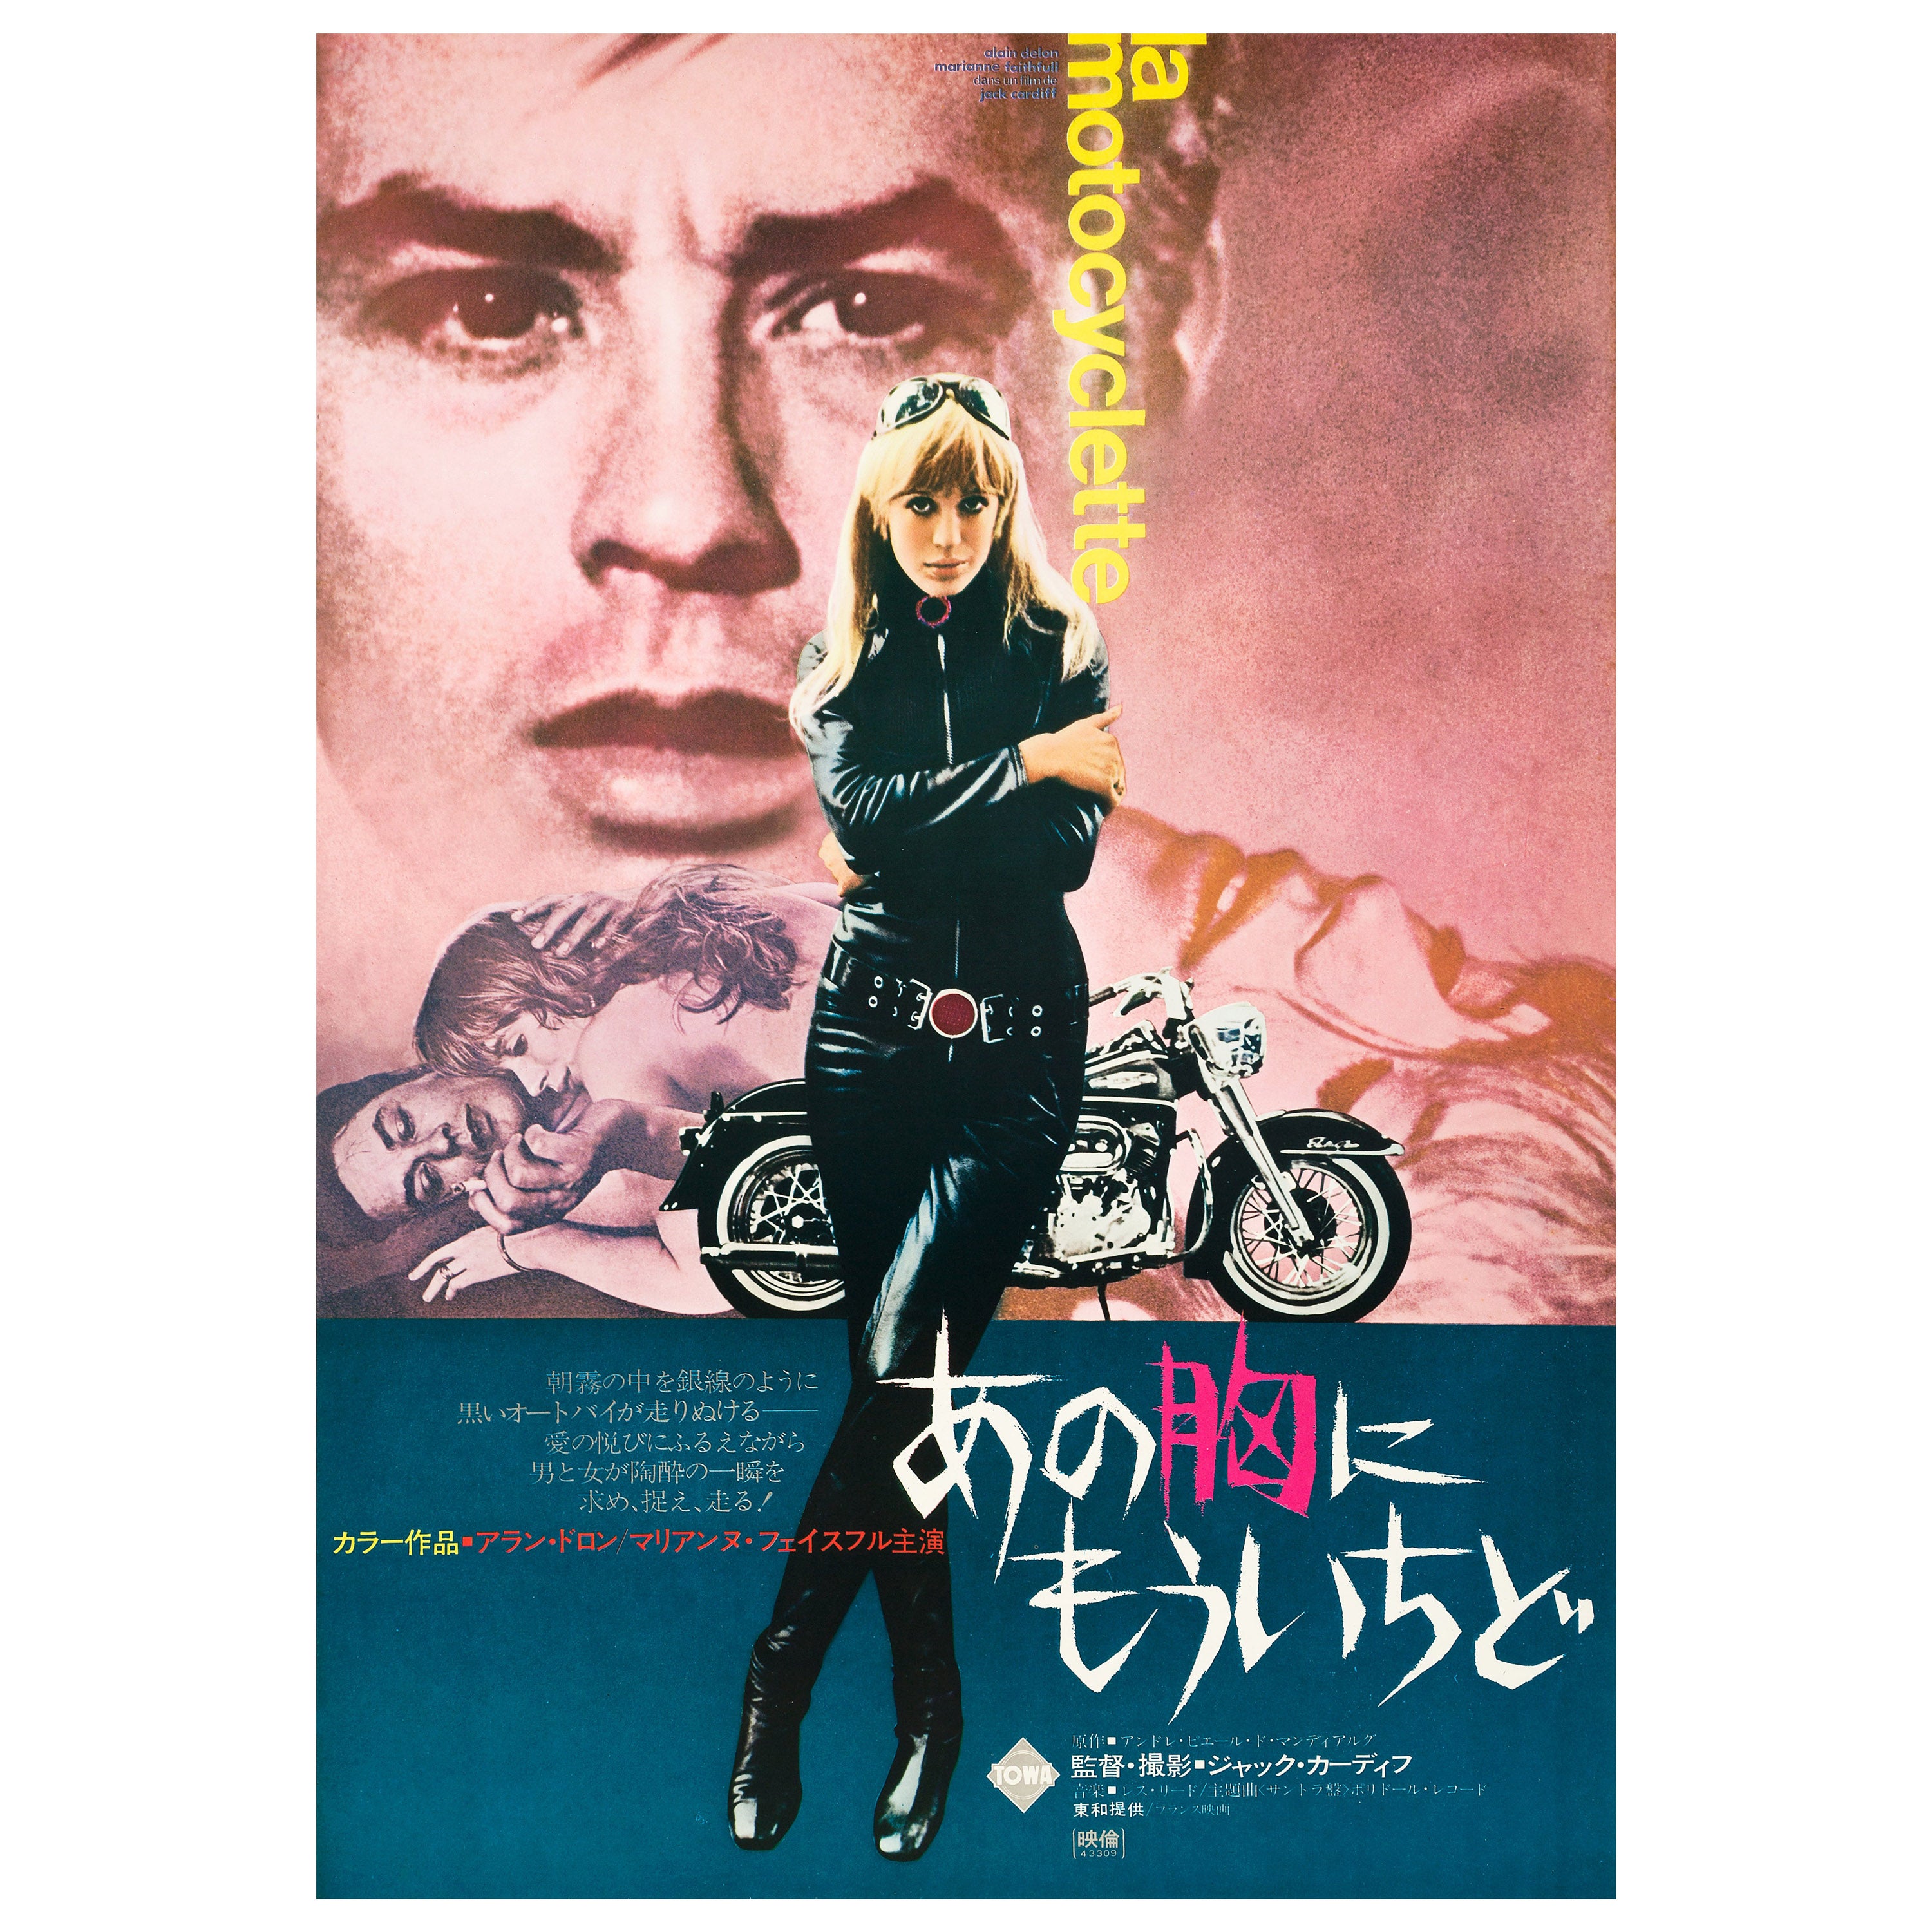 'The Girl on a Motorcycle' Original Vintage Movie Poster, Japanese, 1968 For Sale